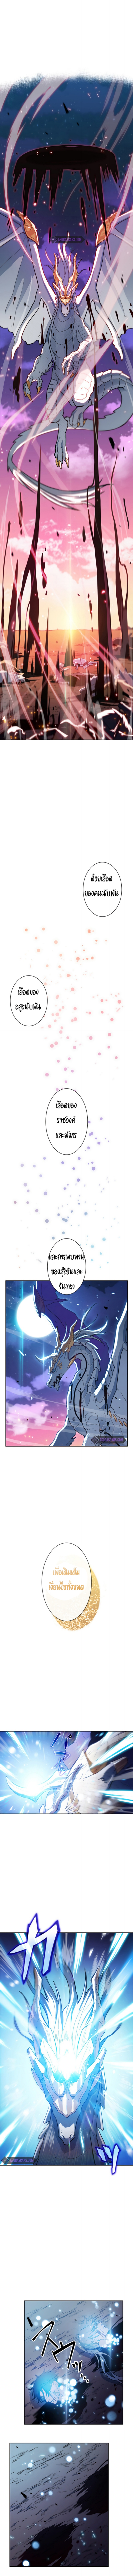 Chapter04 10